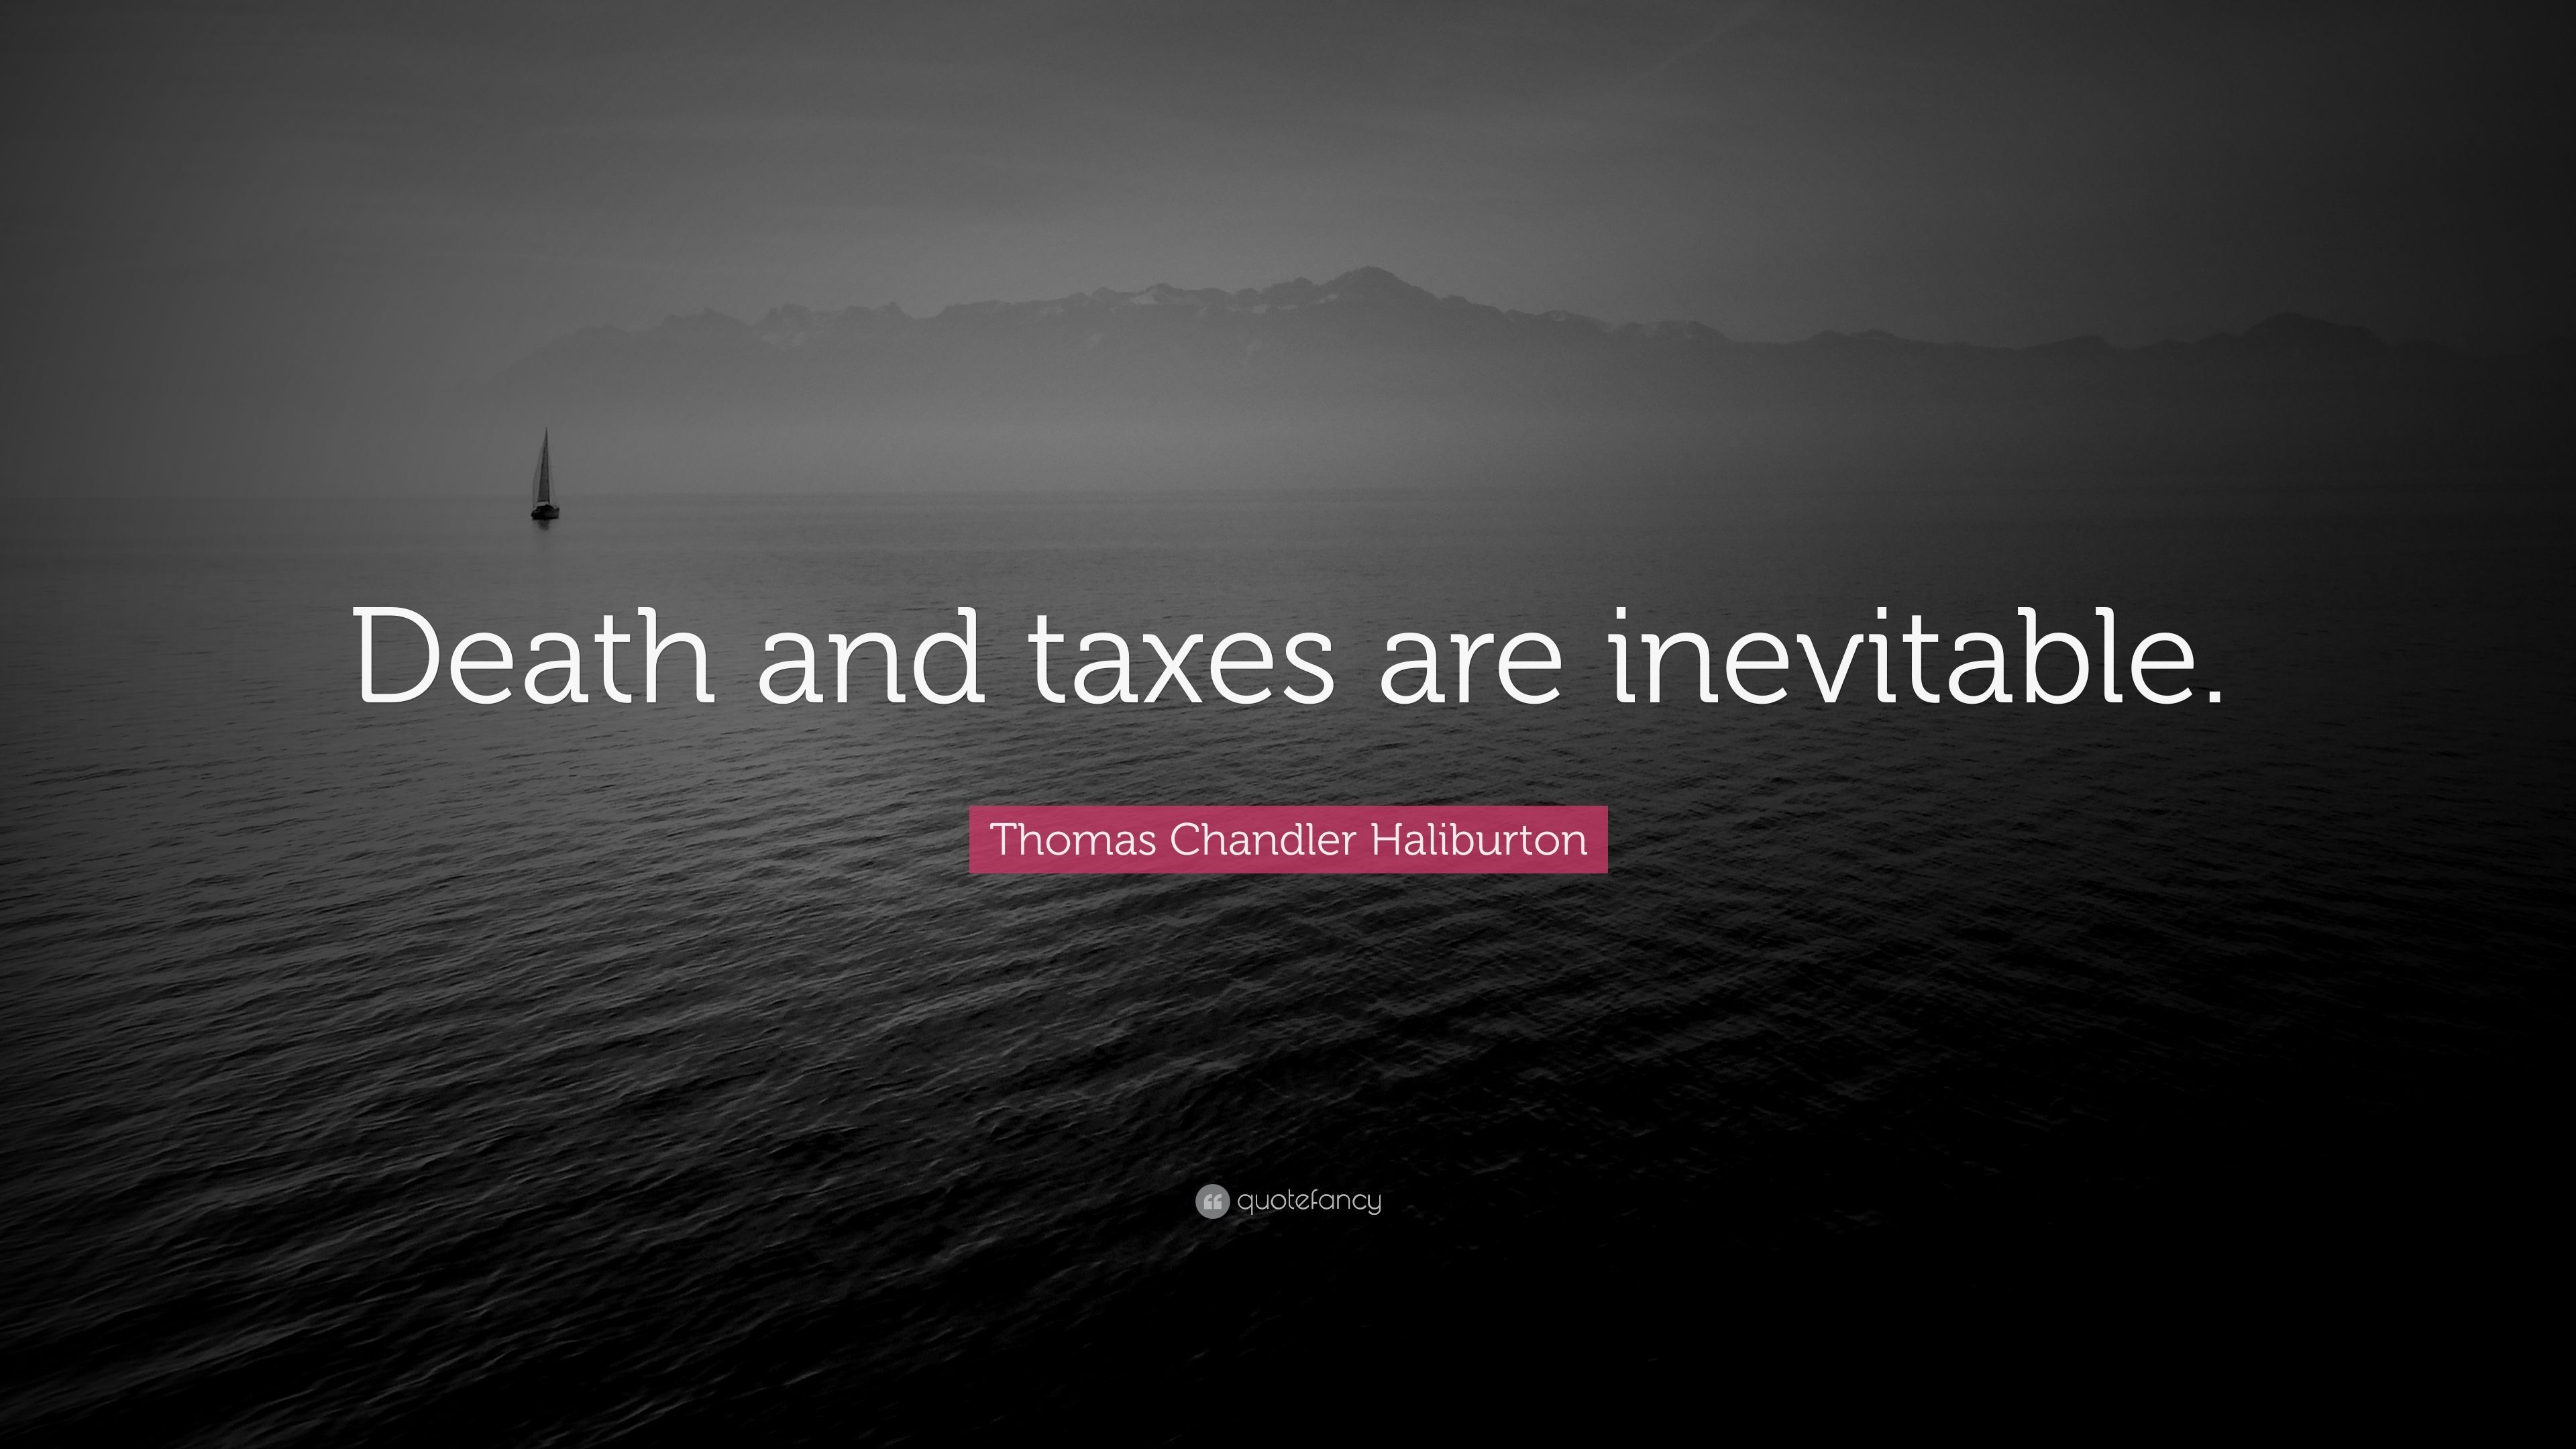 Thomas Chandler Haliburton Quote: “Death and taxes are inevitable.” (7 wallpaper)